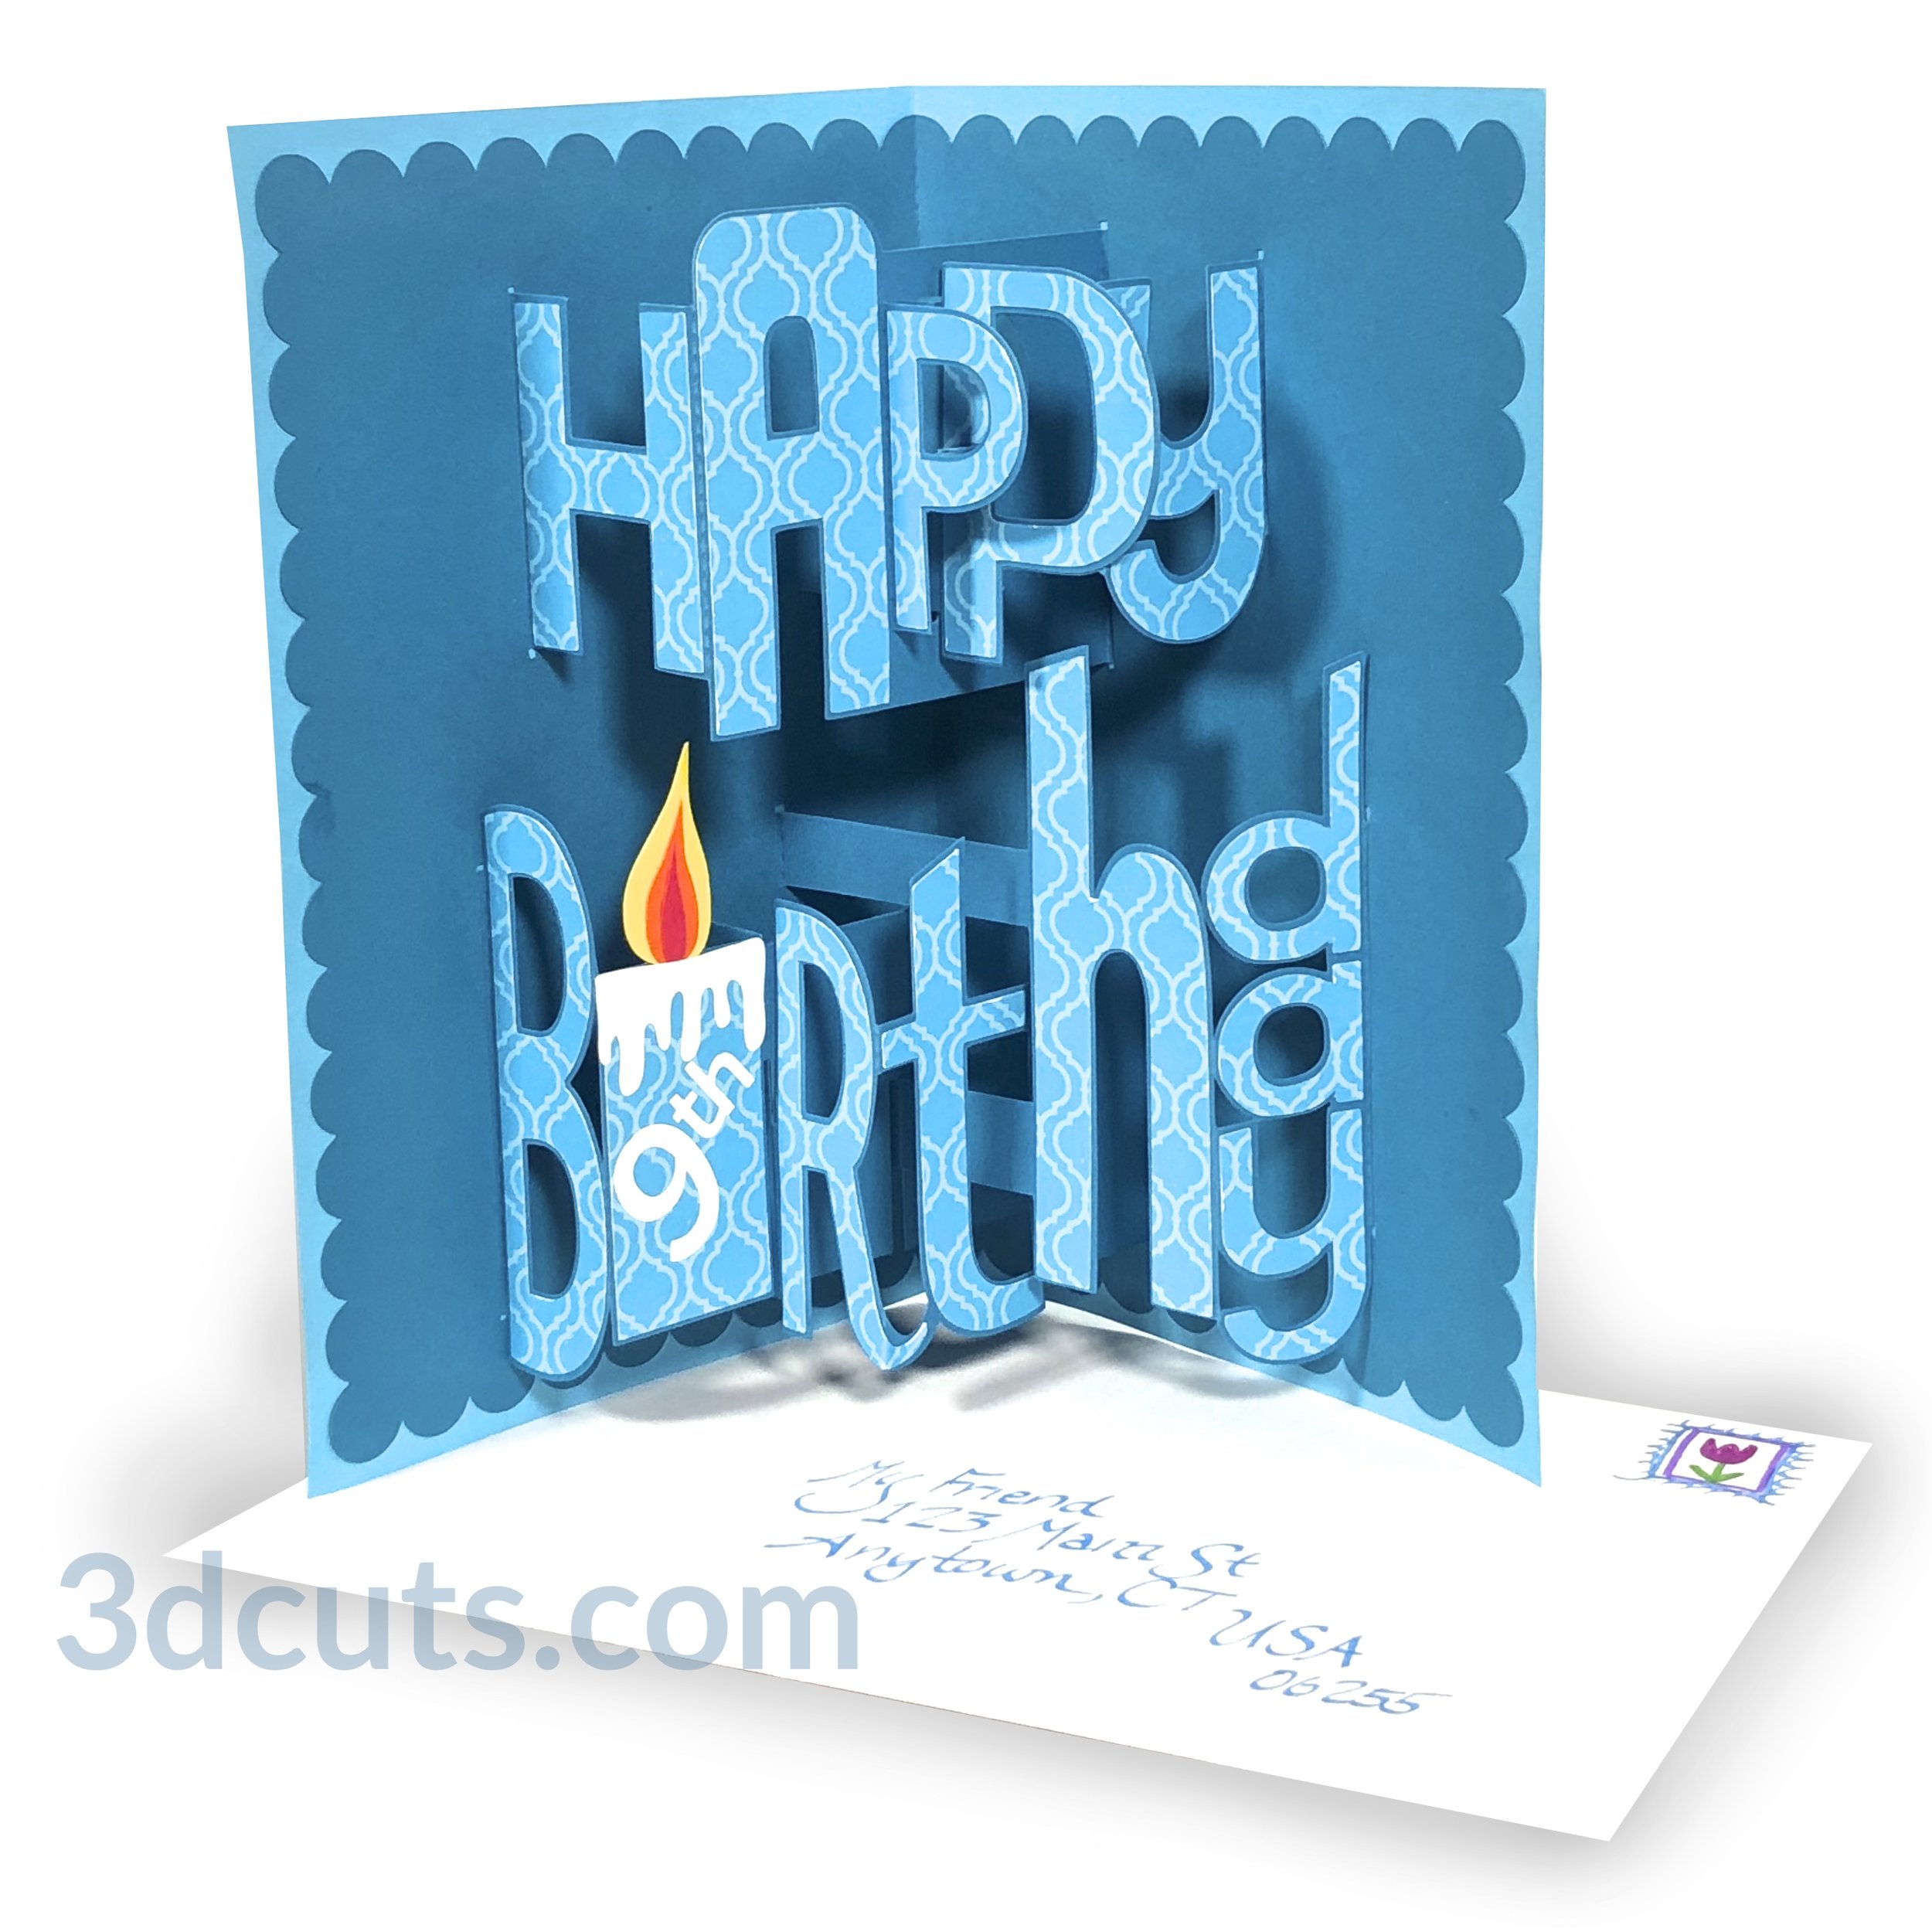 Download Happy Birthday Pop Up Whimsy Font 3dcuts Com SVG, PNG, EPS, DXF File